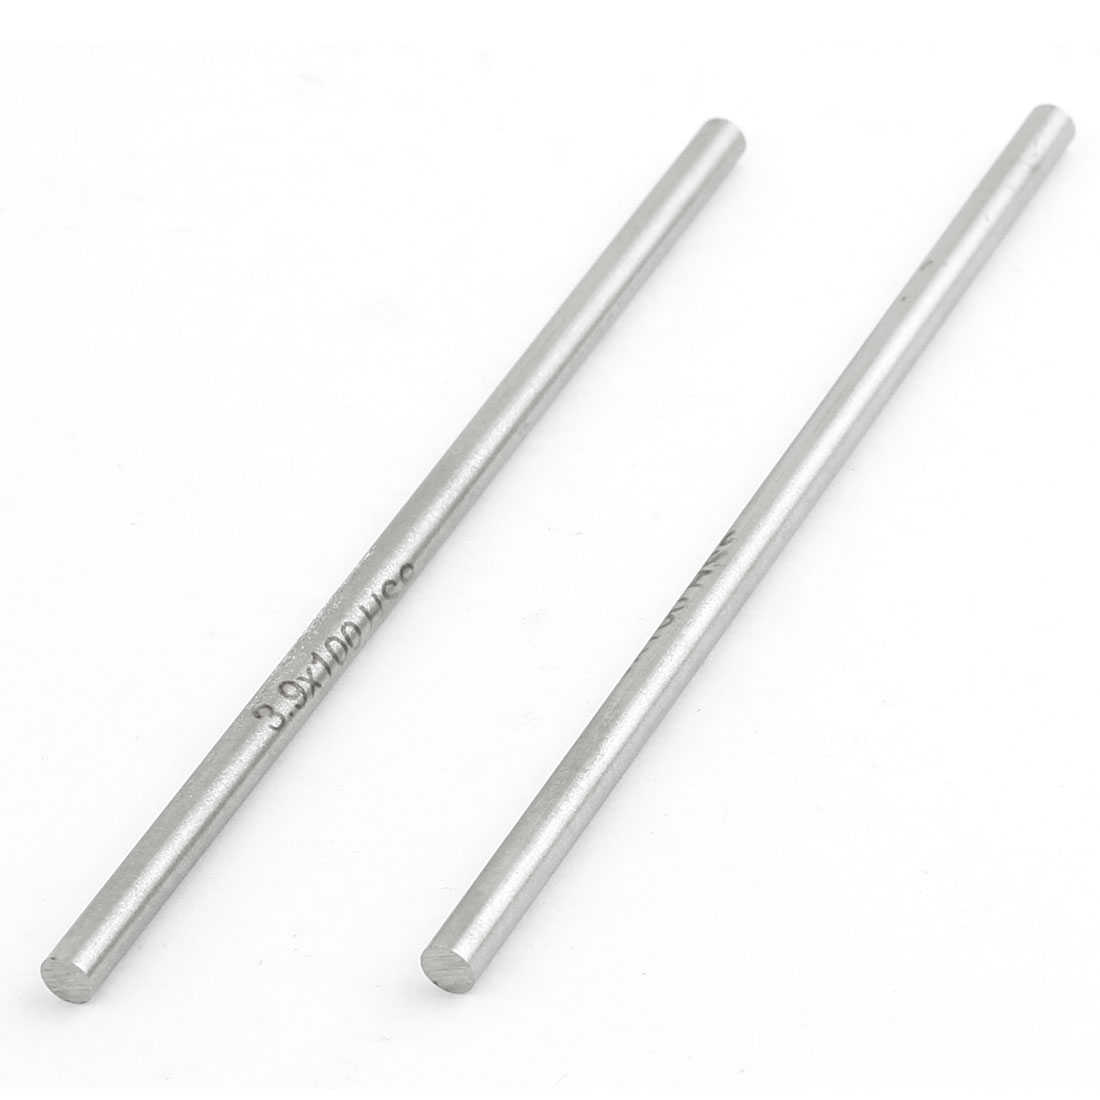 2 x High Speed Steel Round Turning Lathe Carbide Bars 3.9mm Dia 100mm Long